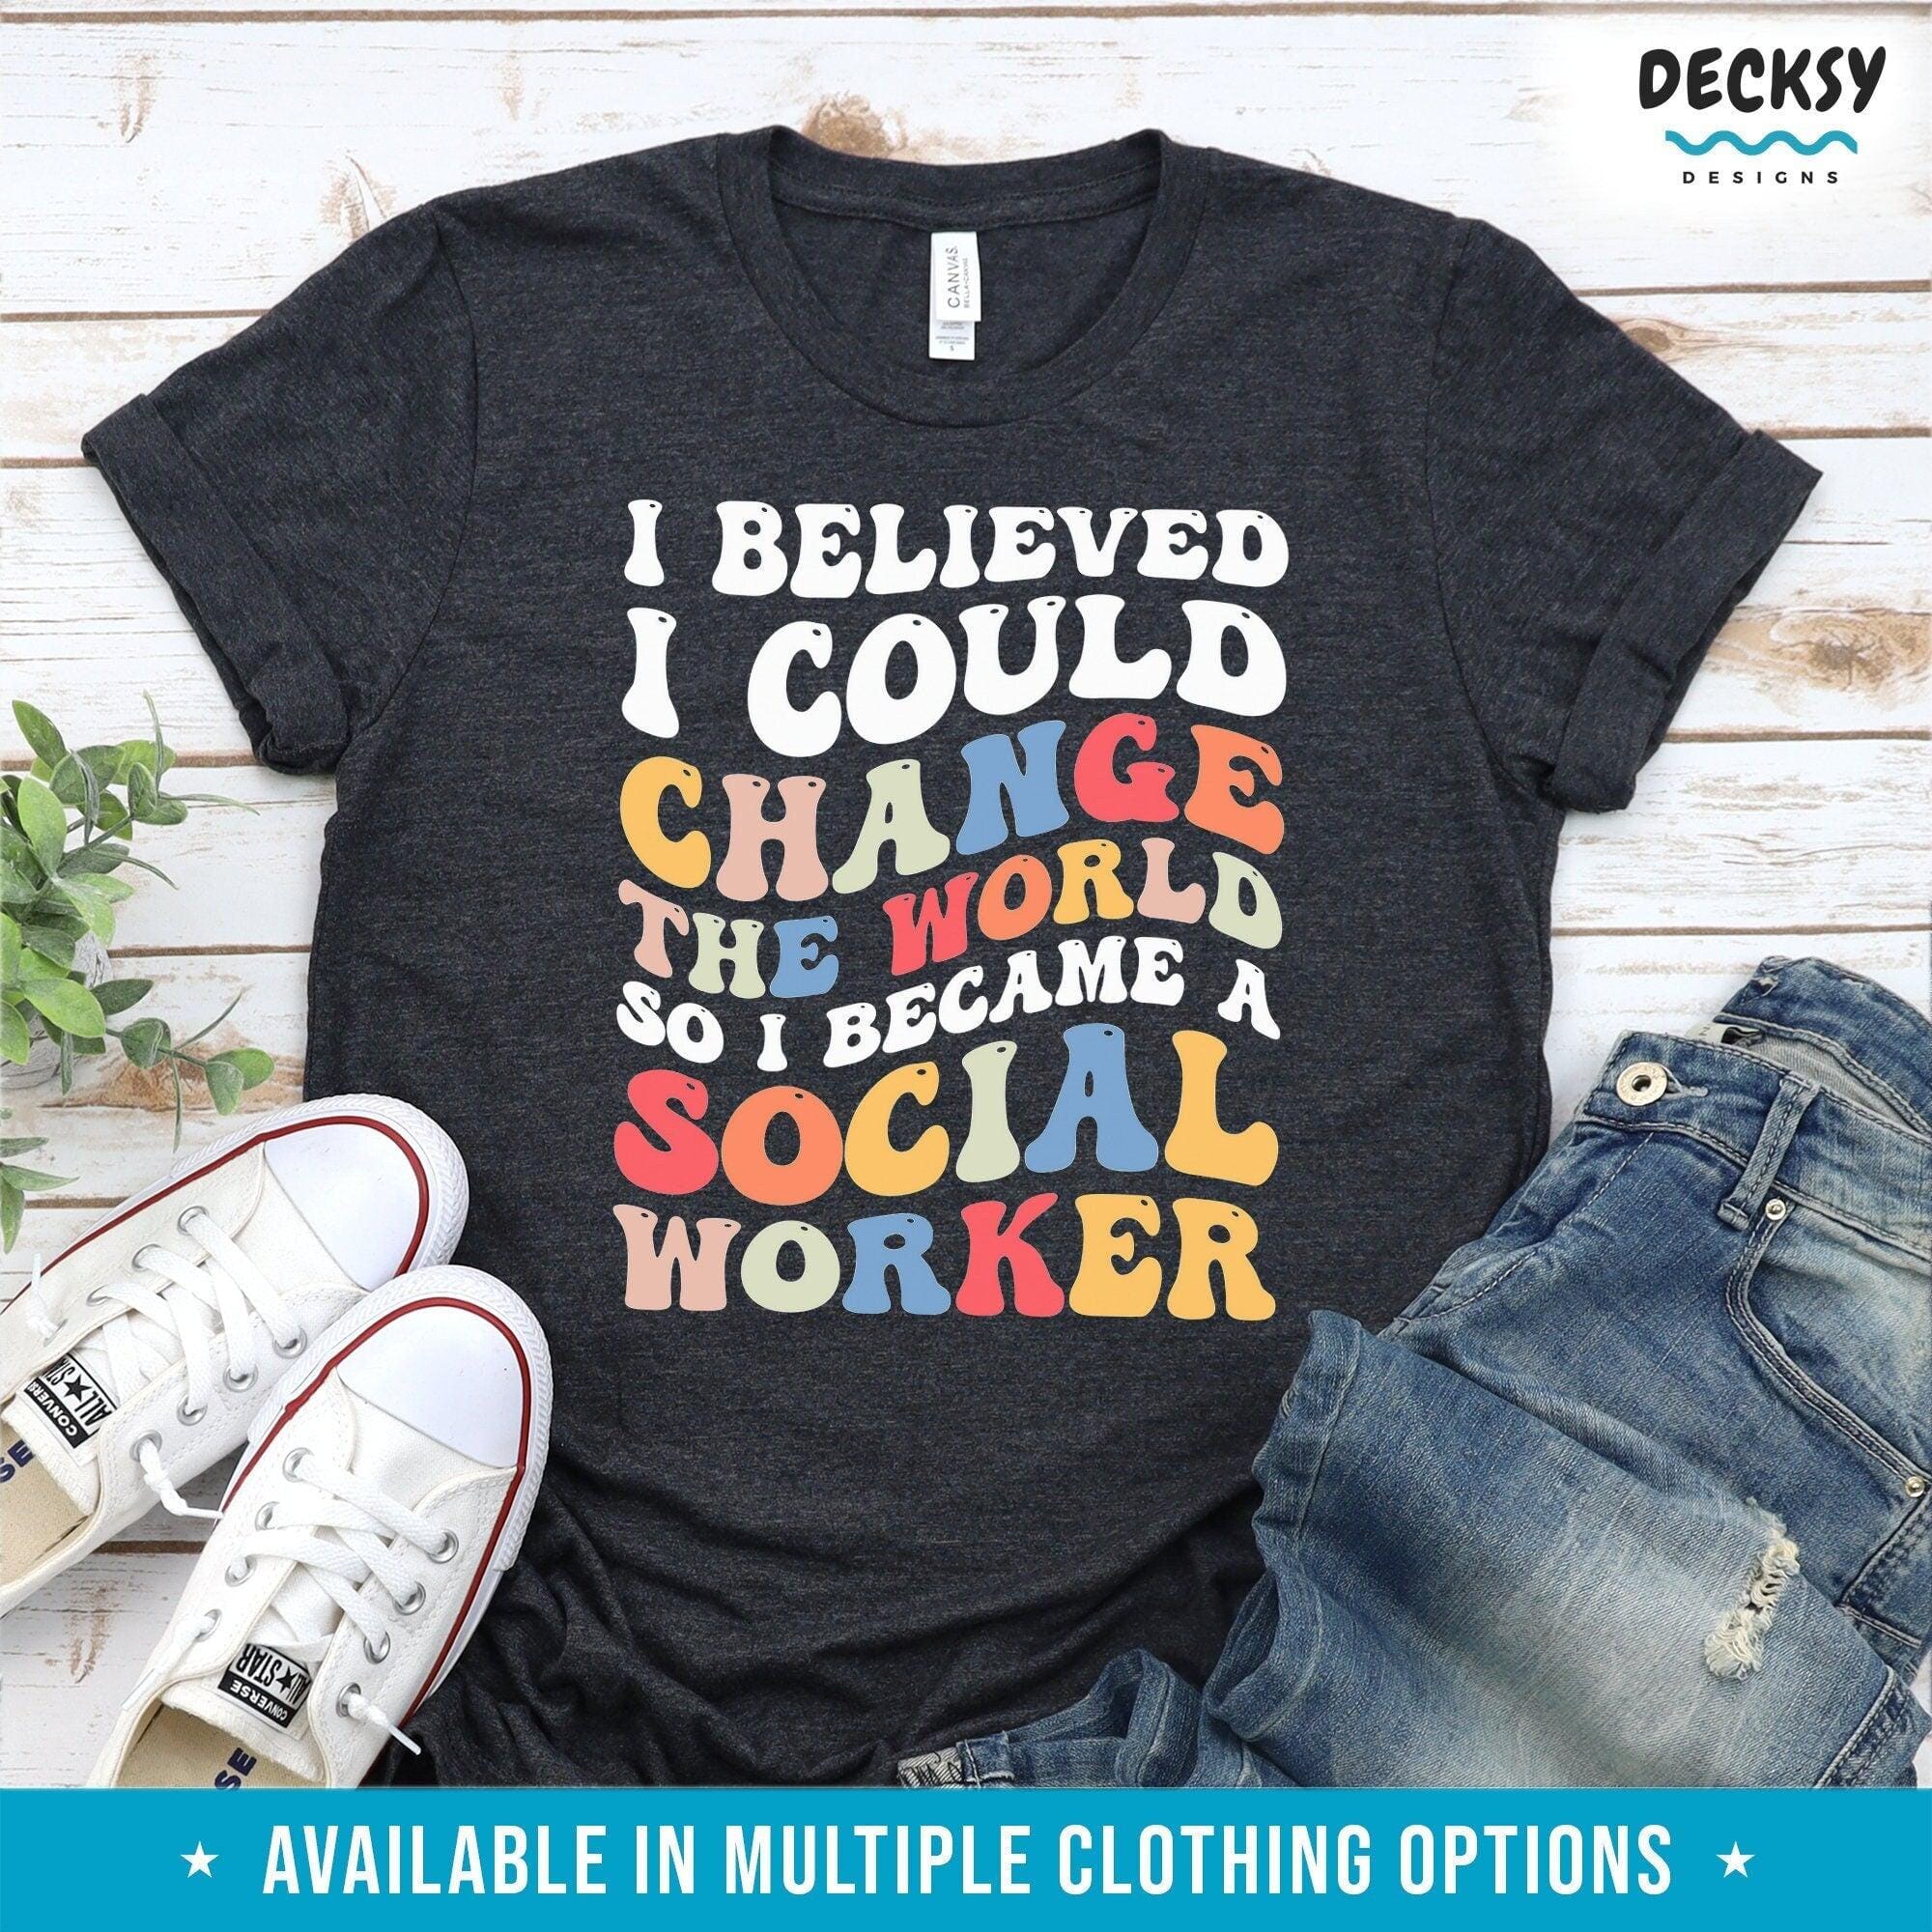 Social Worker Graduation T-shirt, Social Work Gift-Clothing:Gender-Neutral Adult Clothing:Tops & Tees:T-shirts:Graphic Tees-DecksyDesigns